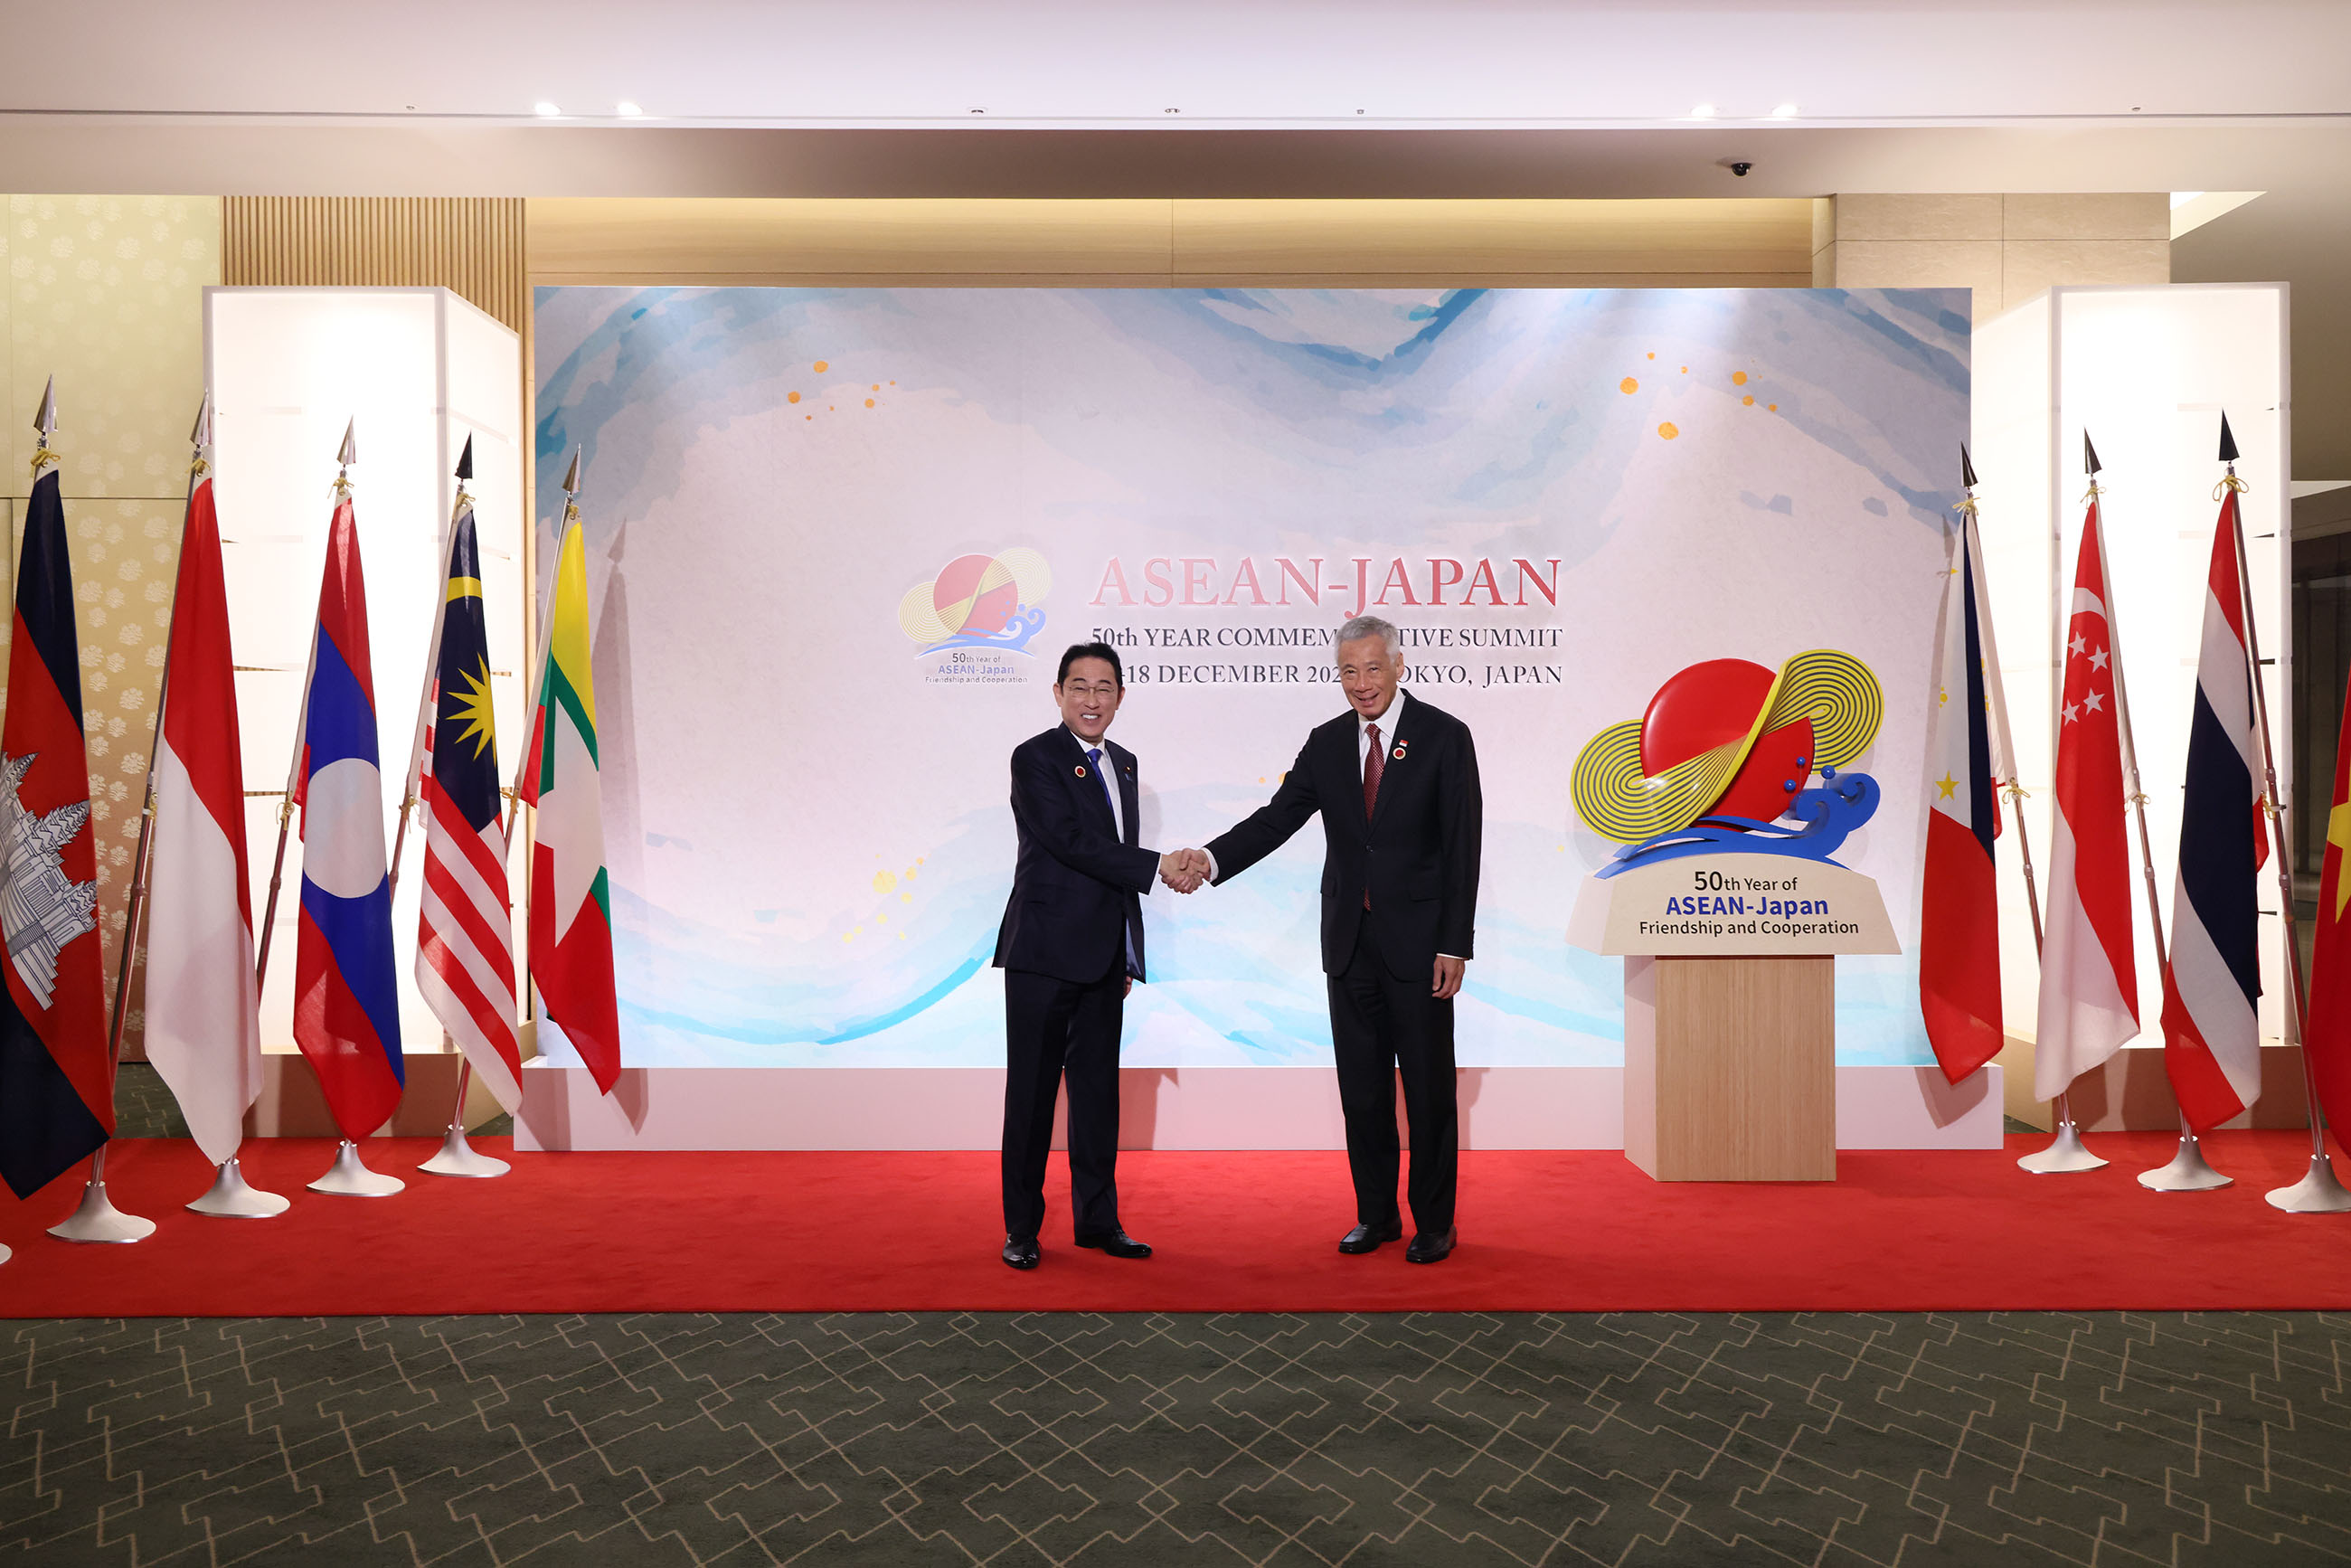 Prime Minister Kishida welcoming Prime Minister Lee of the Republic of Singapore (2)